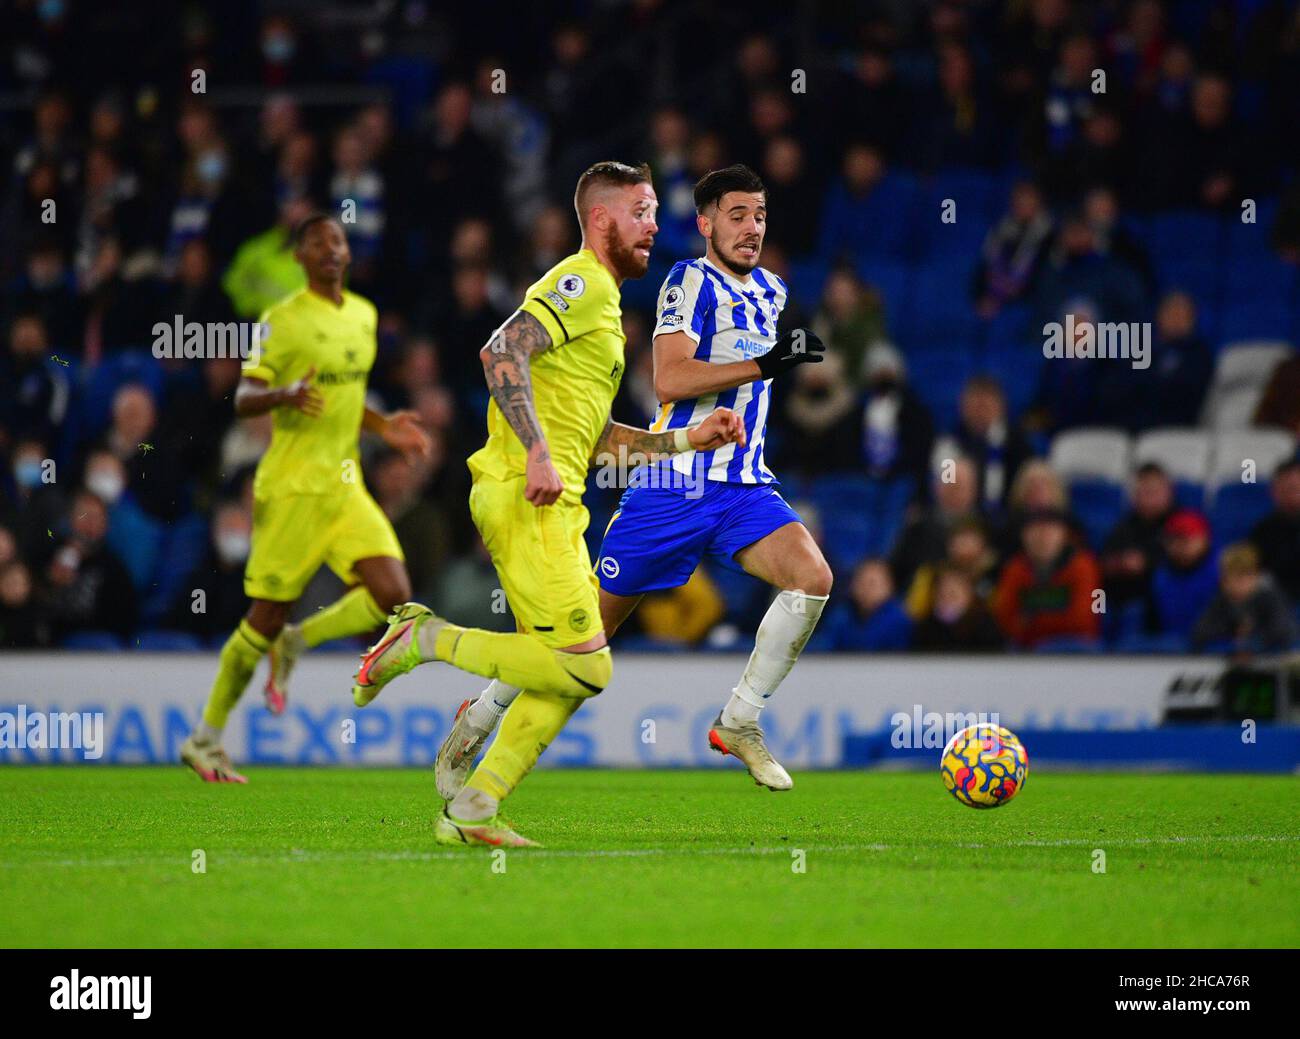 Brighton, UK. 26th Dec, 2021. Pontus Jansson of Brentford runs with the ball during the Premier League match between Brighton & Hove Albion and Brentford at The Amex on December 26th 2021 in Brighton, England. (Photo by Jeff Mood/phcimages.com) Credit: PHC Images/Alamy Live News Stock Photo